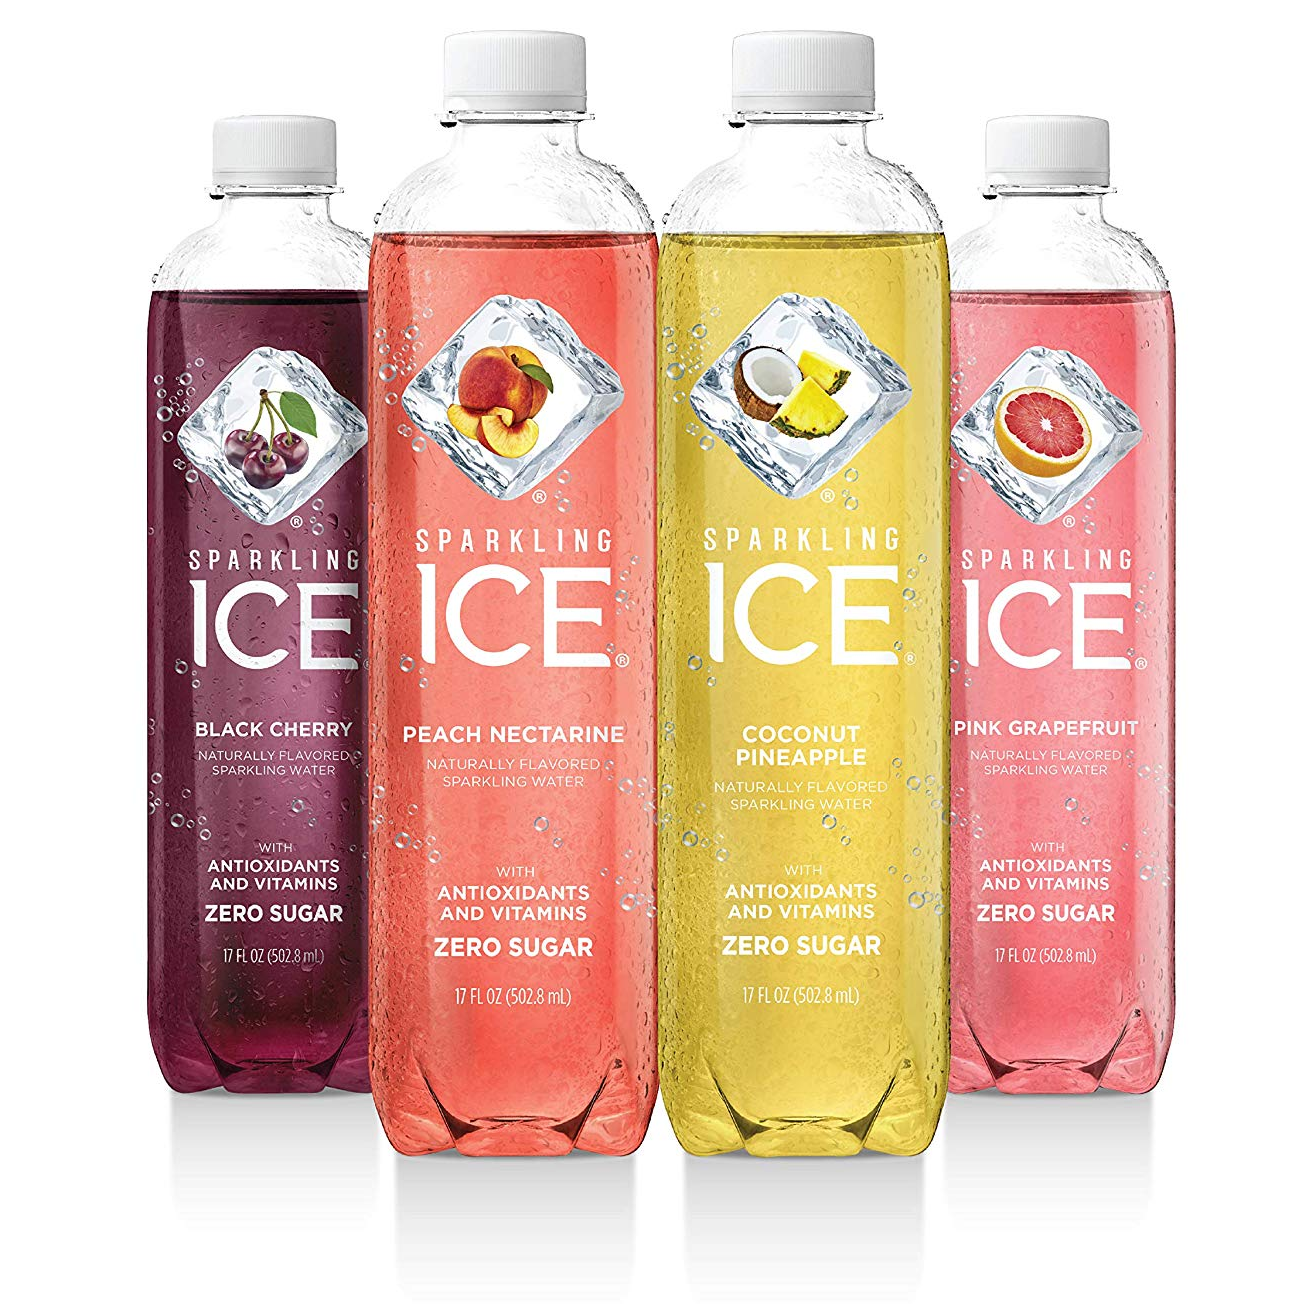 Sparkling Ice Variety Pack (12 Count) Only $9.48 Shipped!